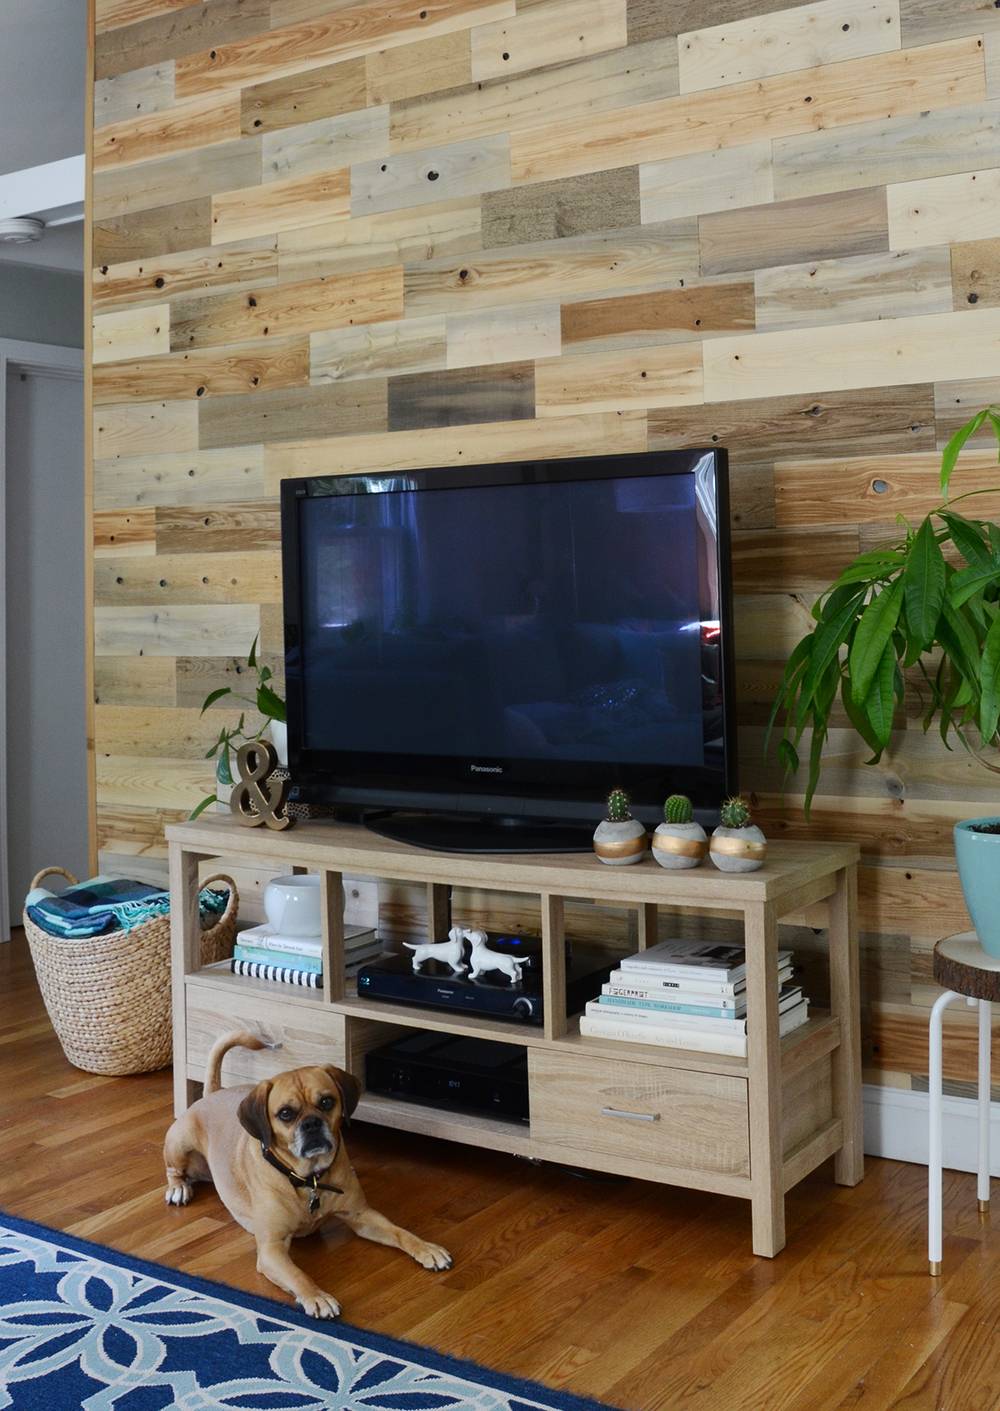 Before and After: Reclaimed Wood Accent Wall